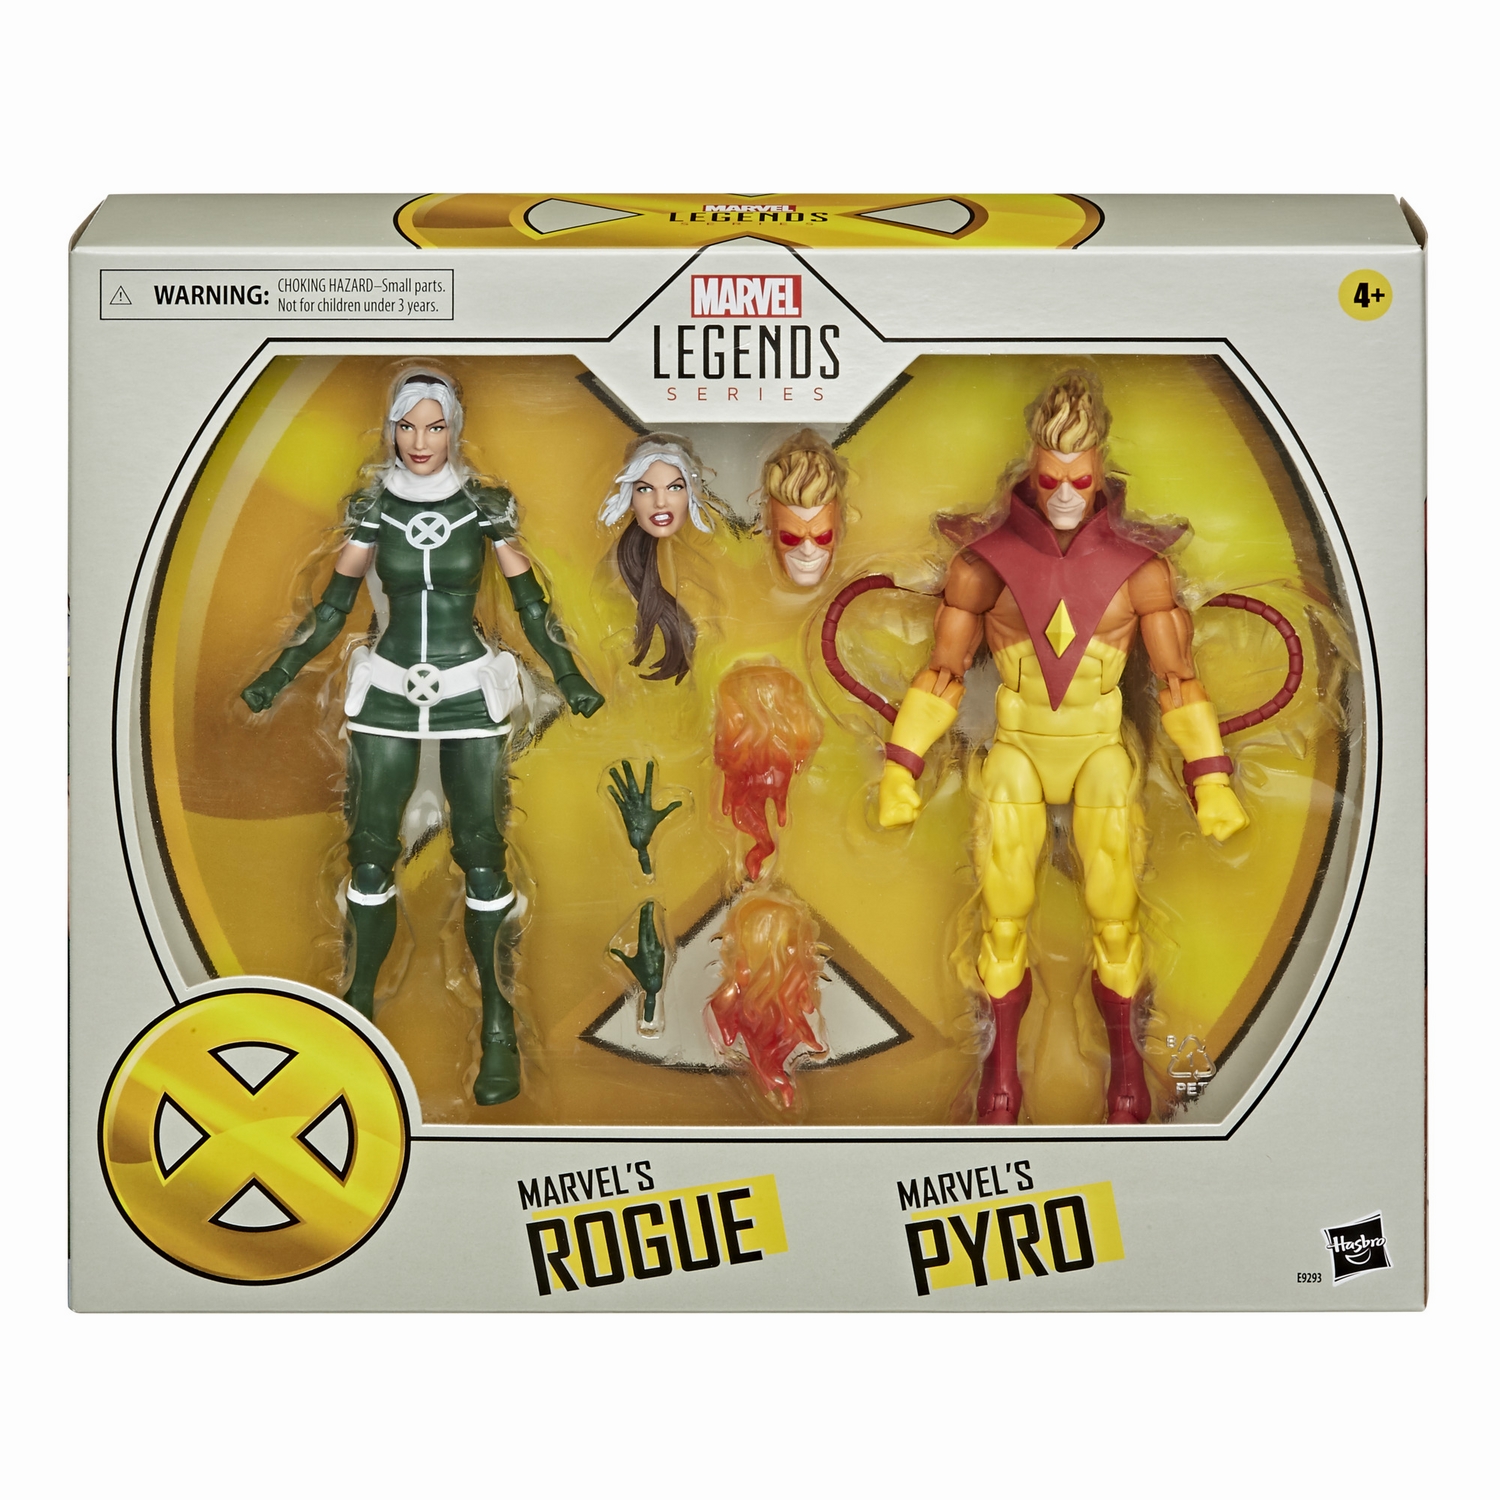 MARVEL LEGENDS SERIES 6-INCH MARVEL’S ROGUE AND PYRO Figure 2-Pack - in pck.jpg